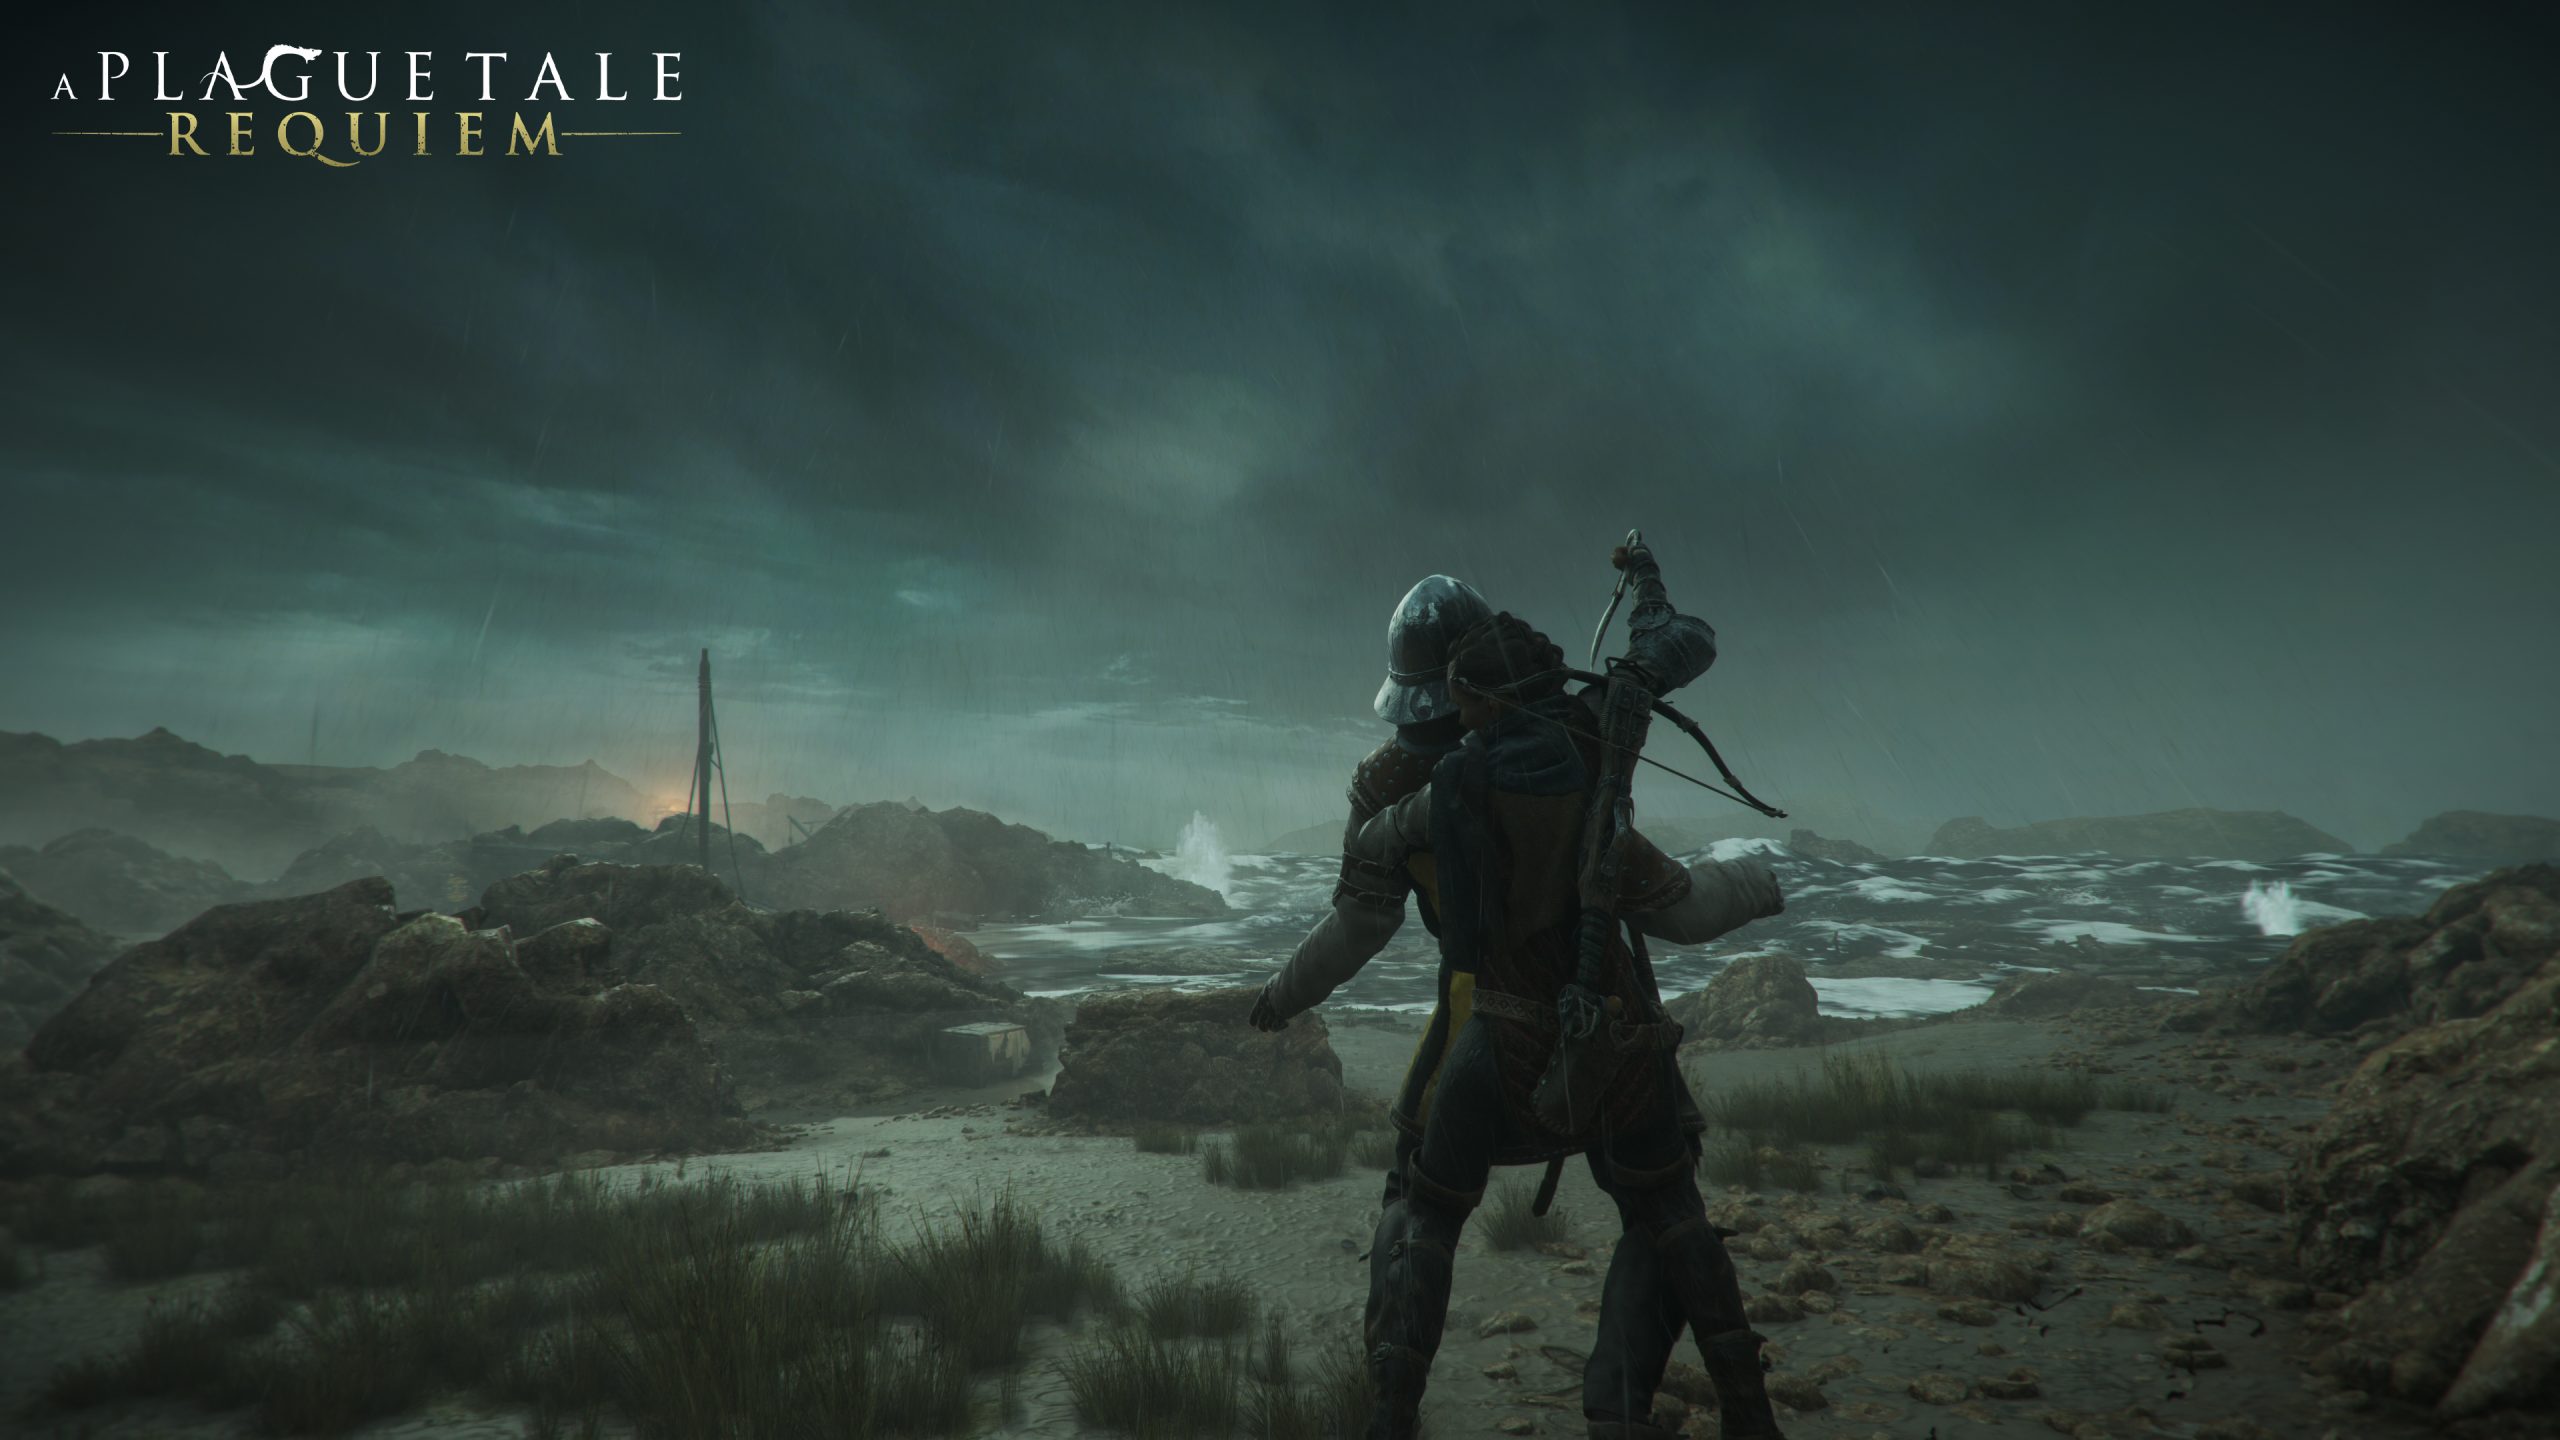 The Perplexing Tale of A Plague Tale: Requiem